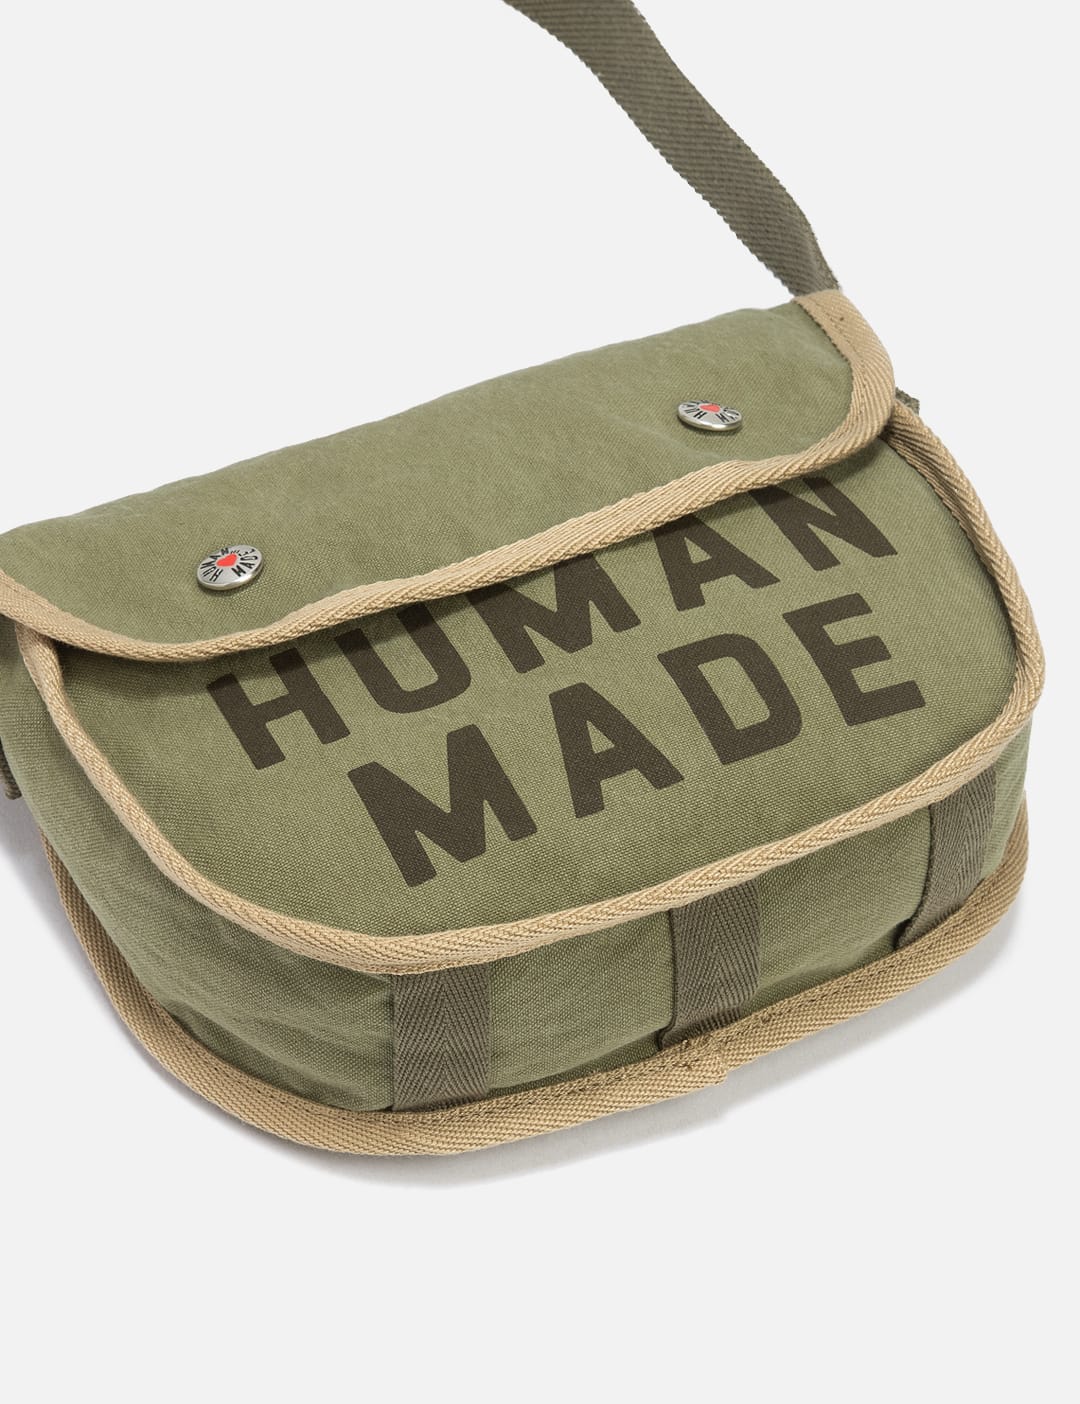 Human Made - Small Tool Bag | HBX - Globally Curated Fashion and 